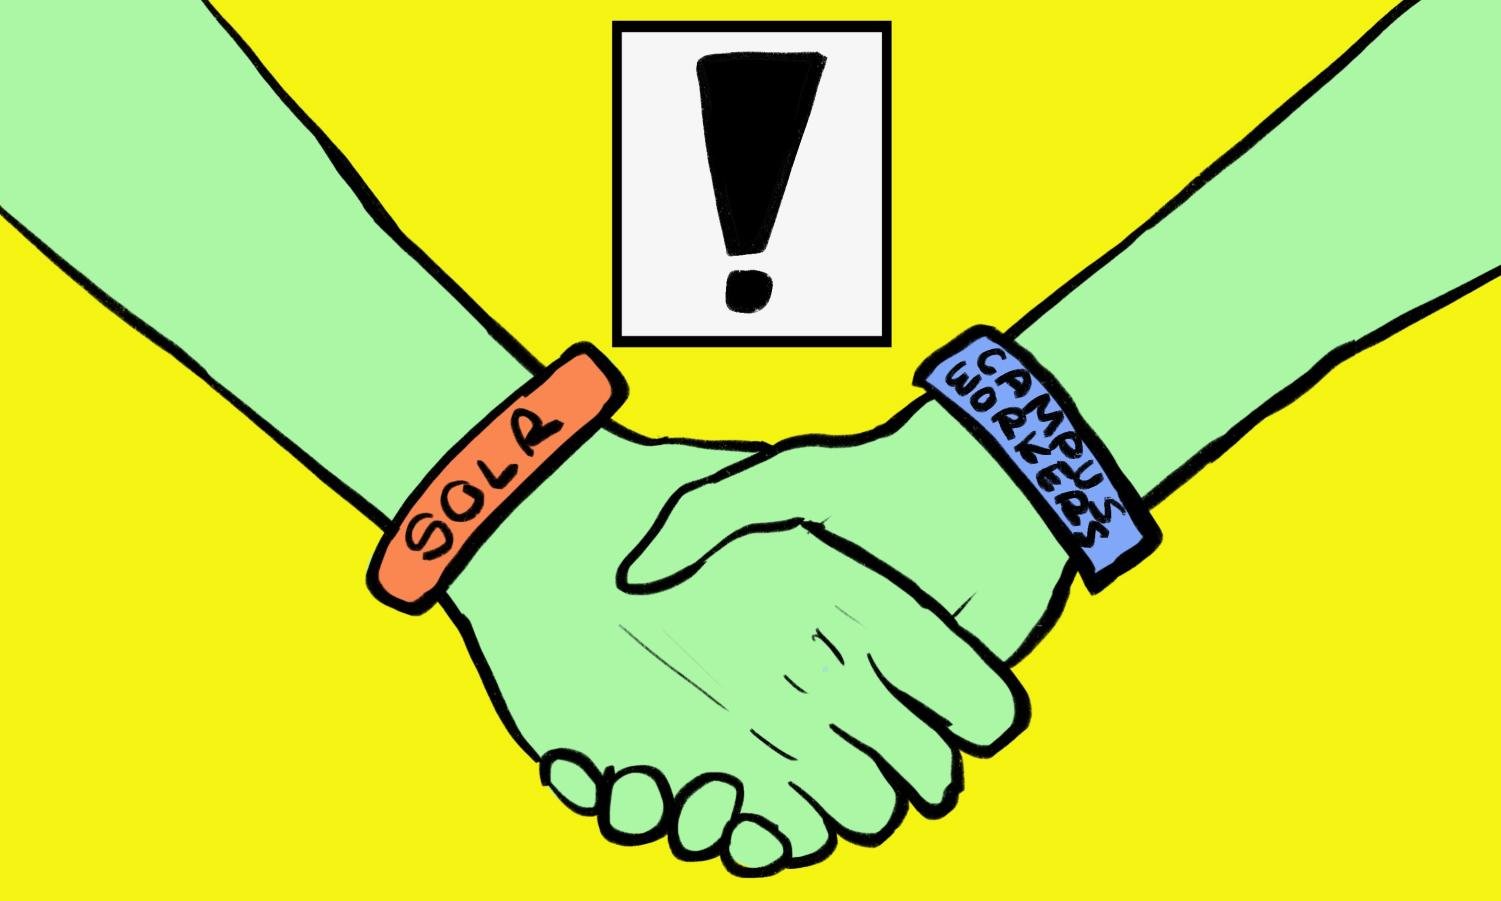 An+illustration+of+two+green+arms+holding+hands.+One+wears+an+orange+wristband+with+the+word+%E2%80%9CSOLR%2C%E2%80%9D+and+the+other+wears+a+blue+wristband+with+the+words+%E2%80%9CCampus+Workers.%E2%80%9D+A+white+box+with+a+black+exclamation+mark+in+it+is+in+the+middle+of+the+illustration.